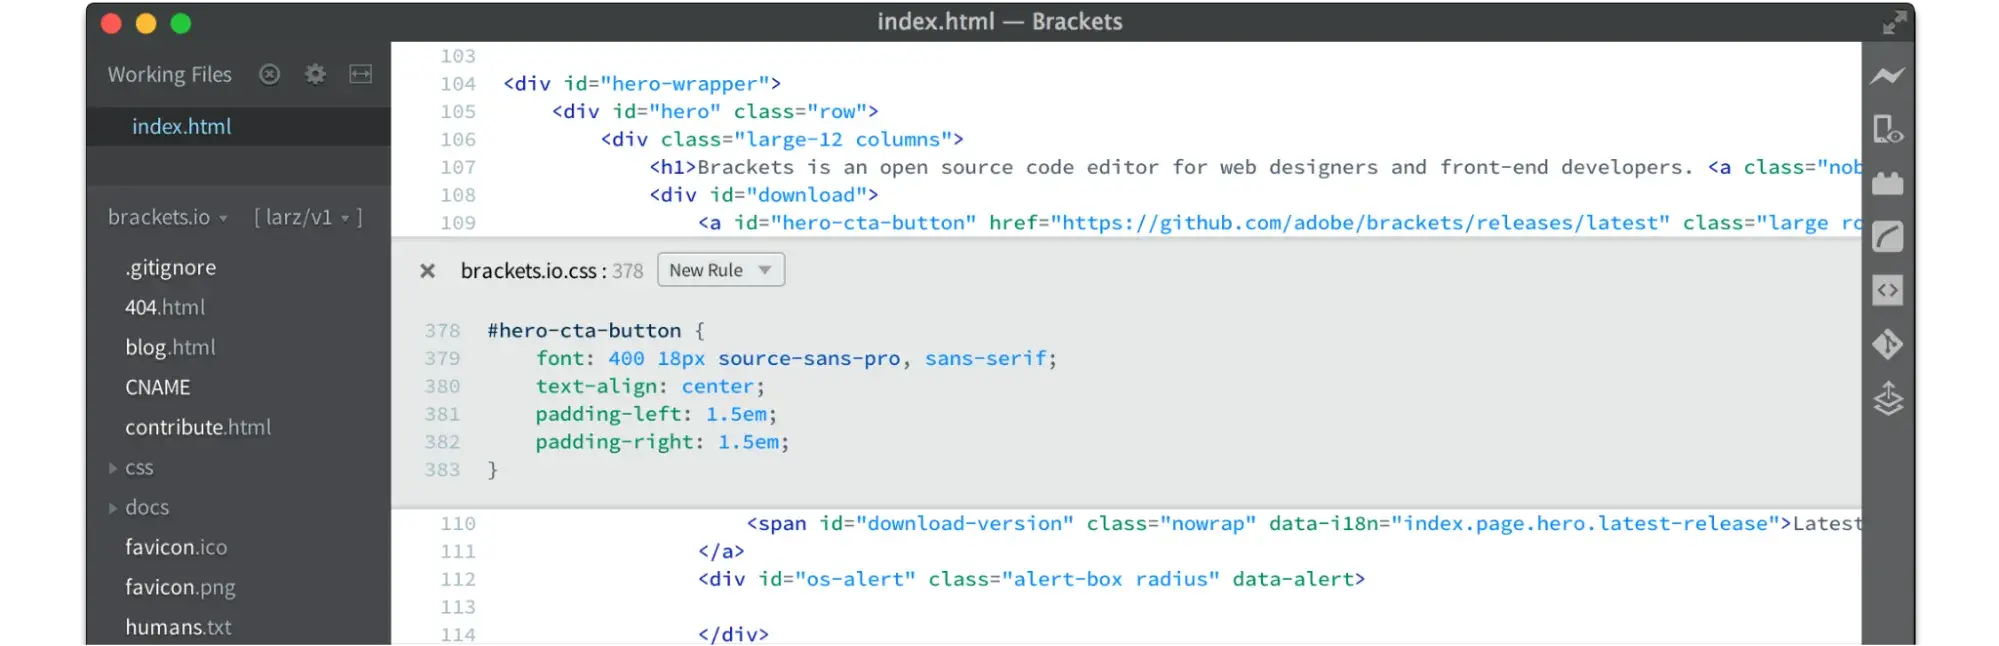 html editor with live preview, brackets